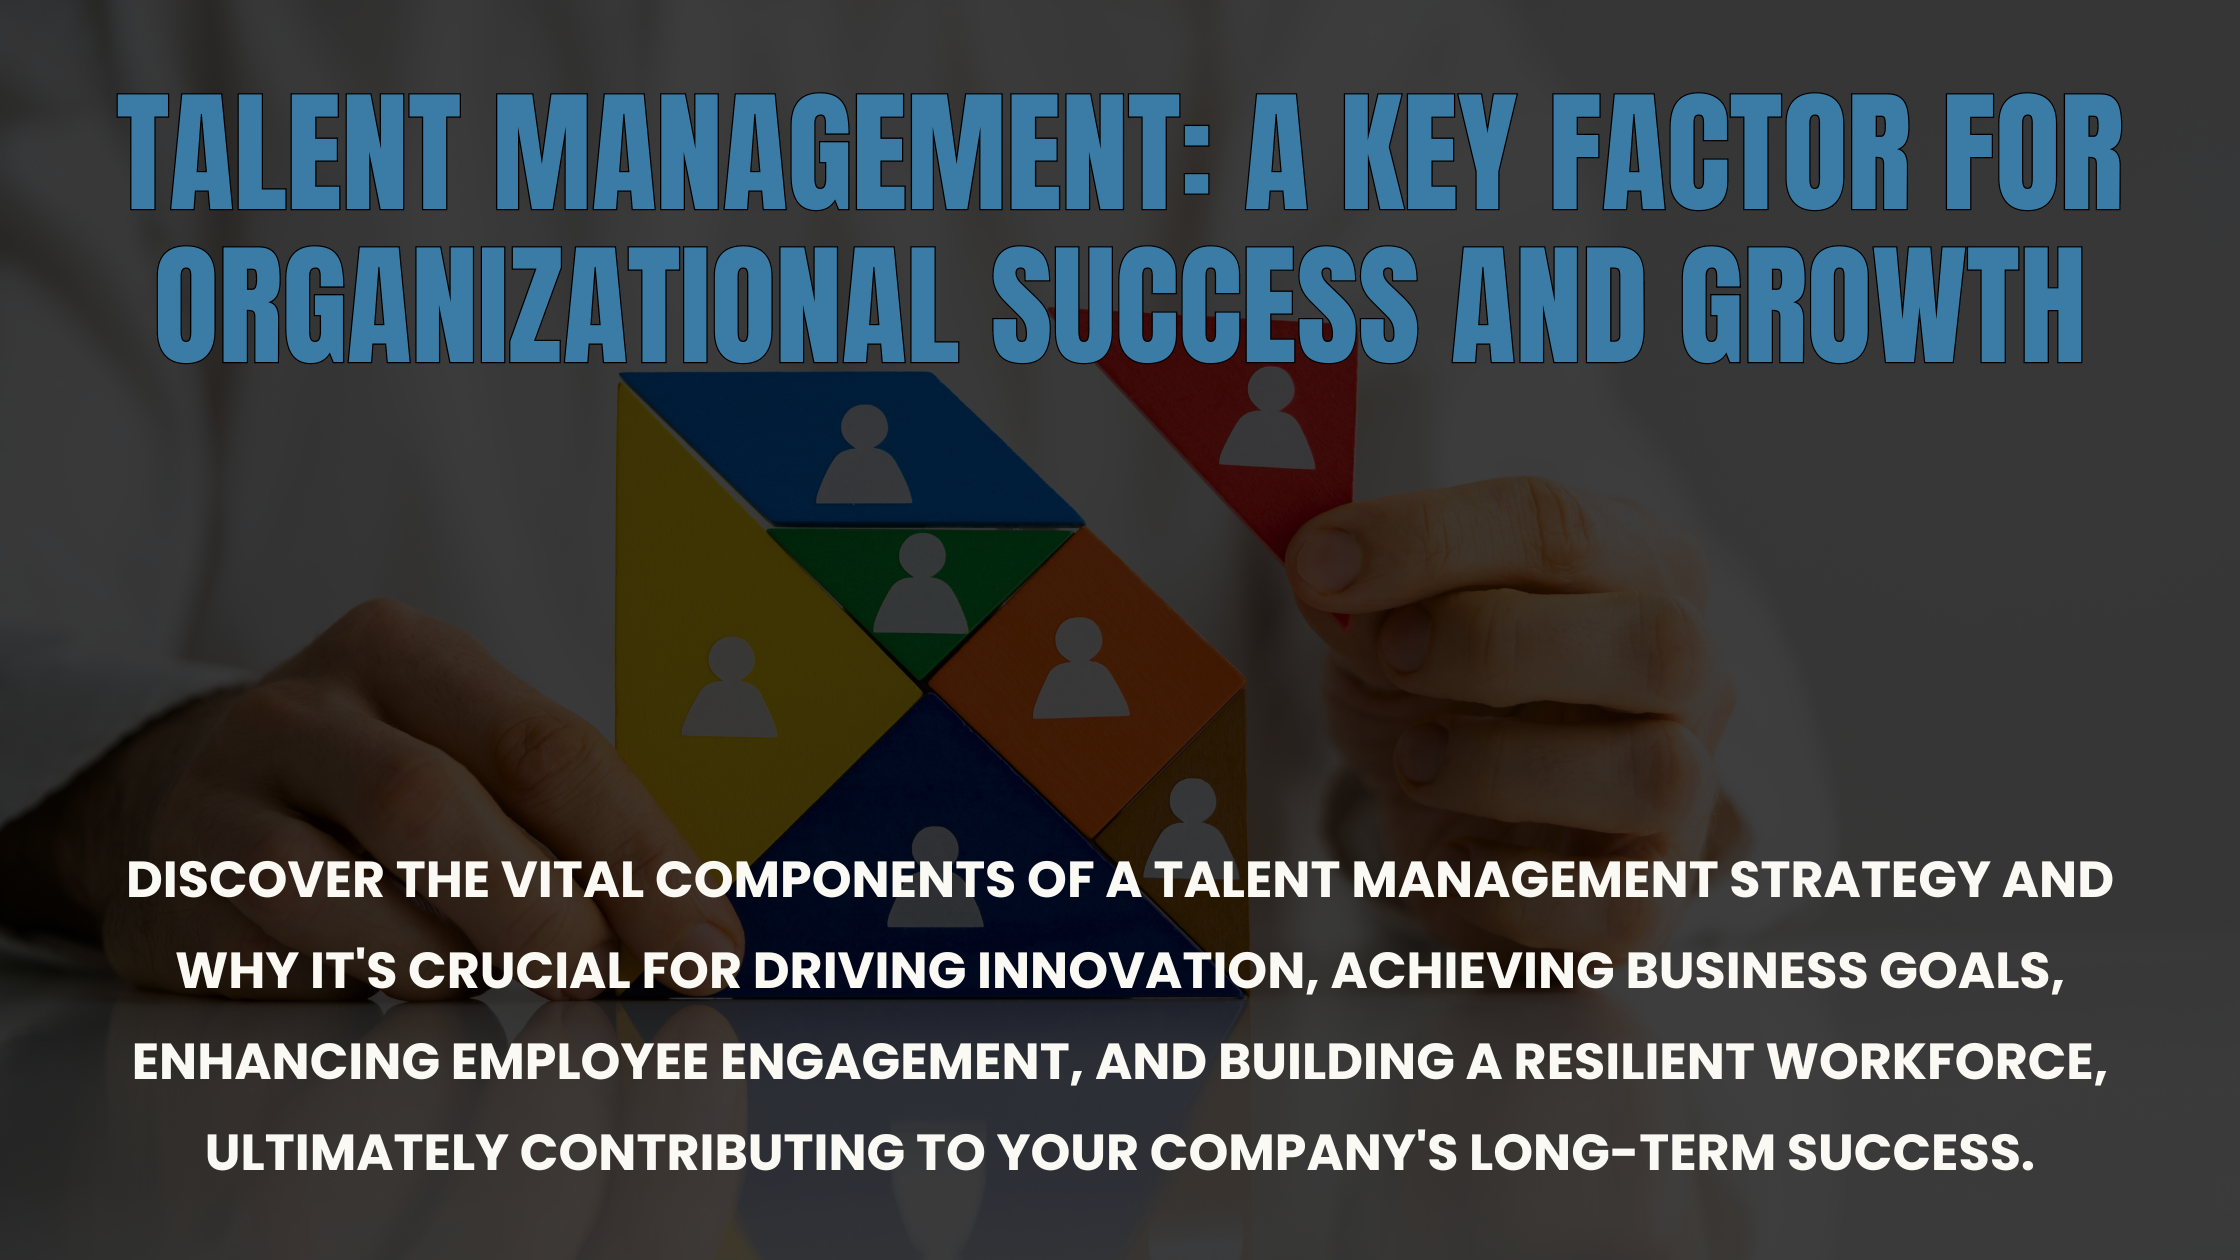 Discover the vital components of a talent management strategy and why it's crucial for driving innovation, achieving business goals, enhancing employee engagement, and building a resilient workforce, ultimately contributing to your company's long-term success.